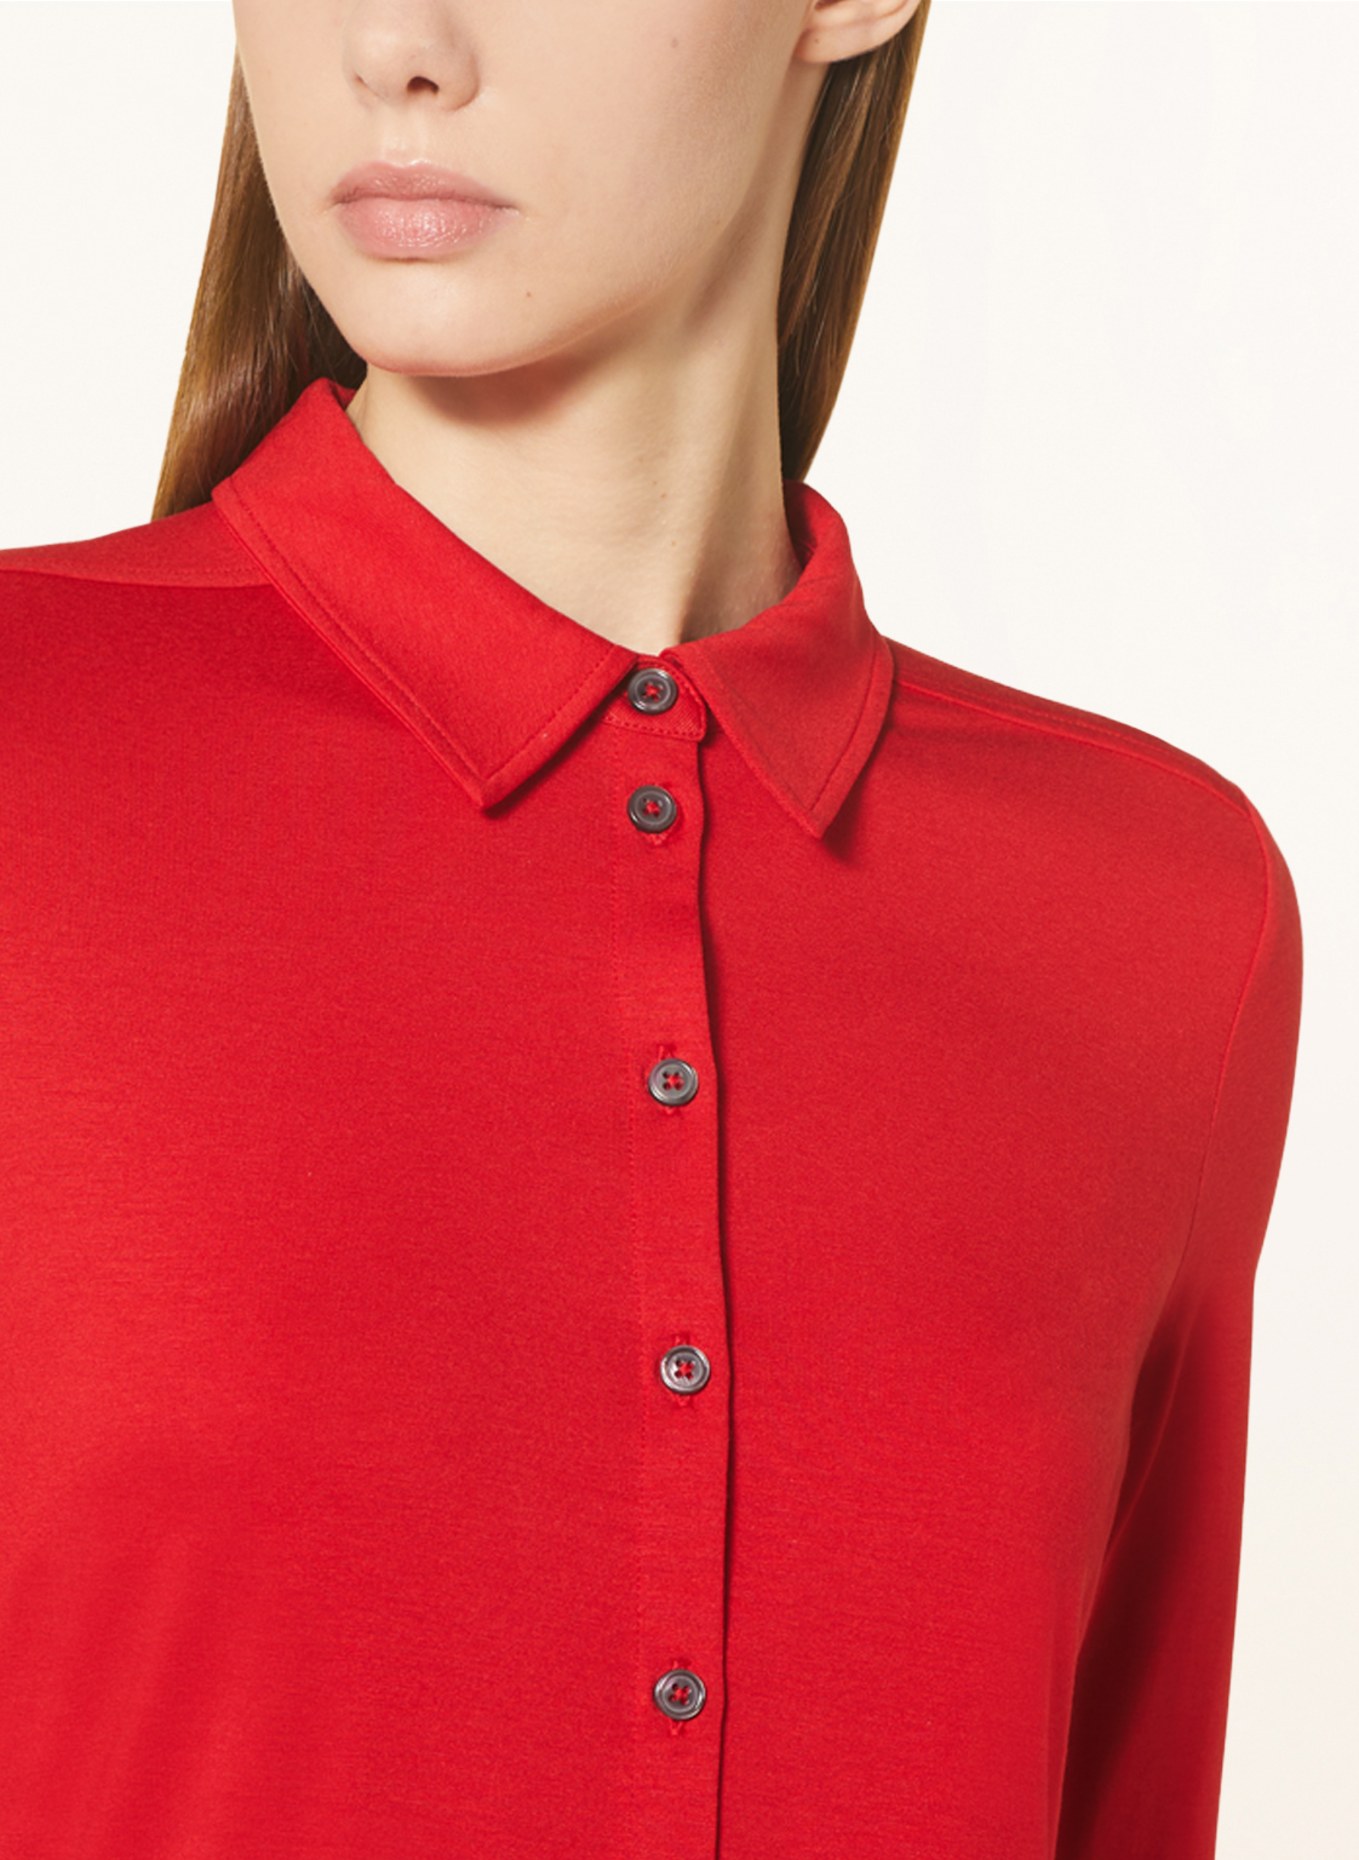 Marc O'Polo Shirt blouse made of jersey, Color: RED (Image 4)